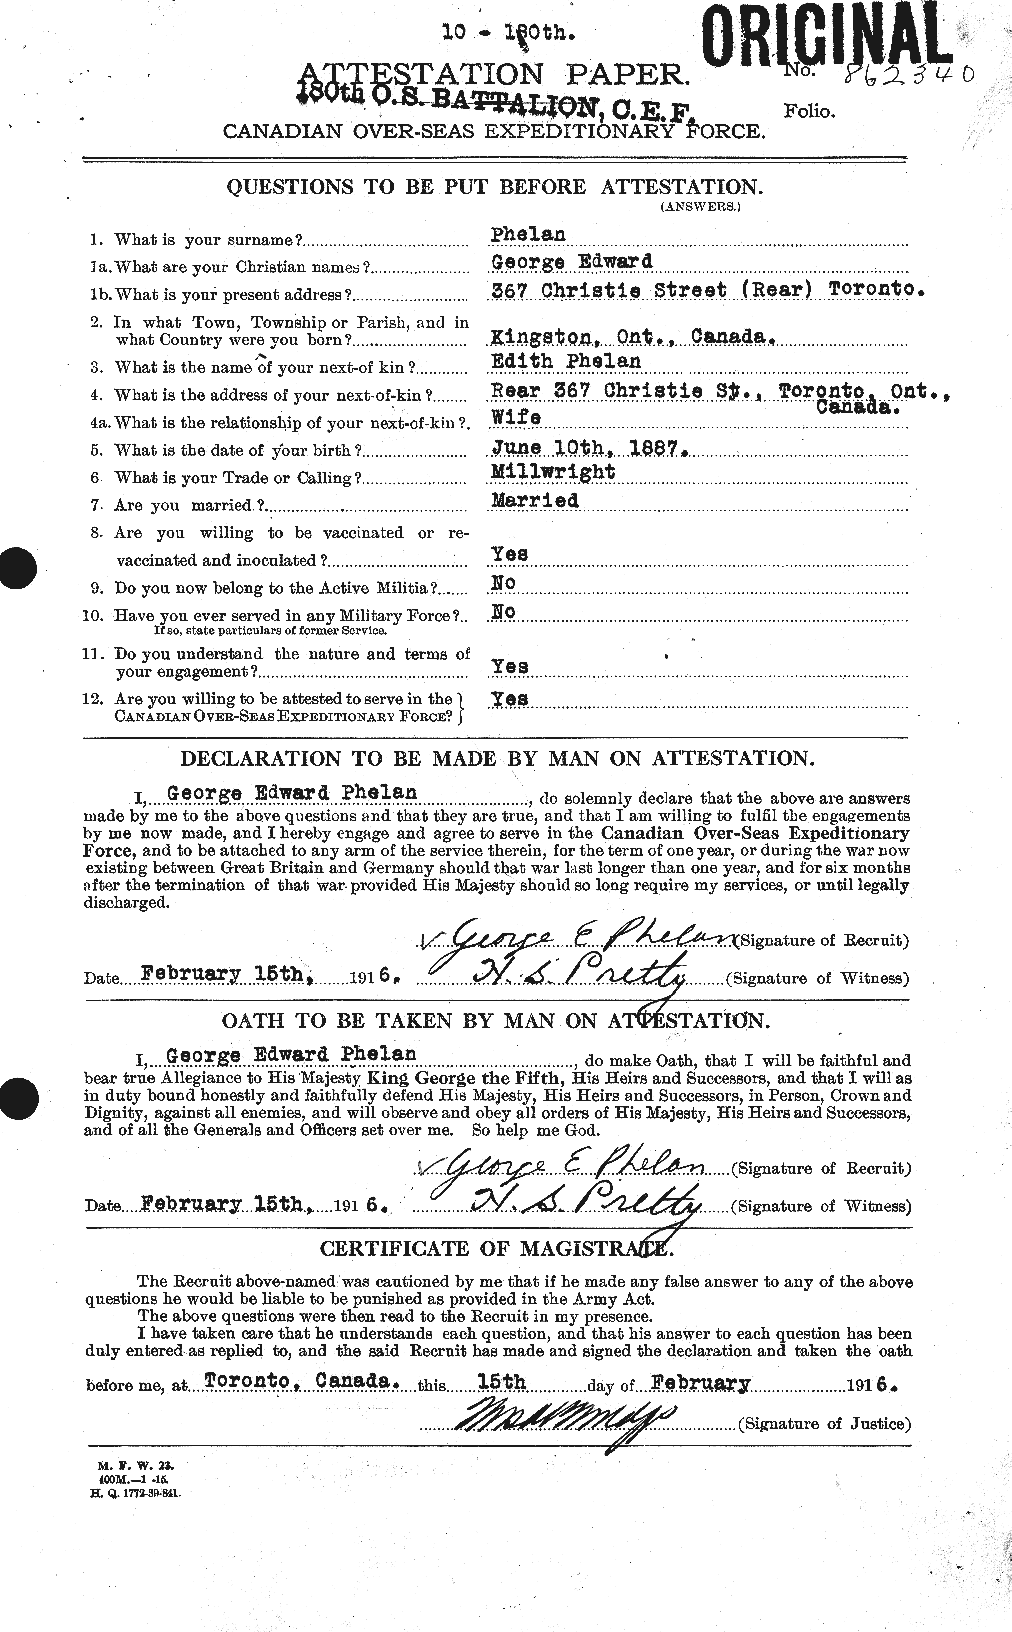 Personnel Records of the First World War - CEF 576946a